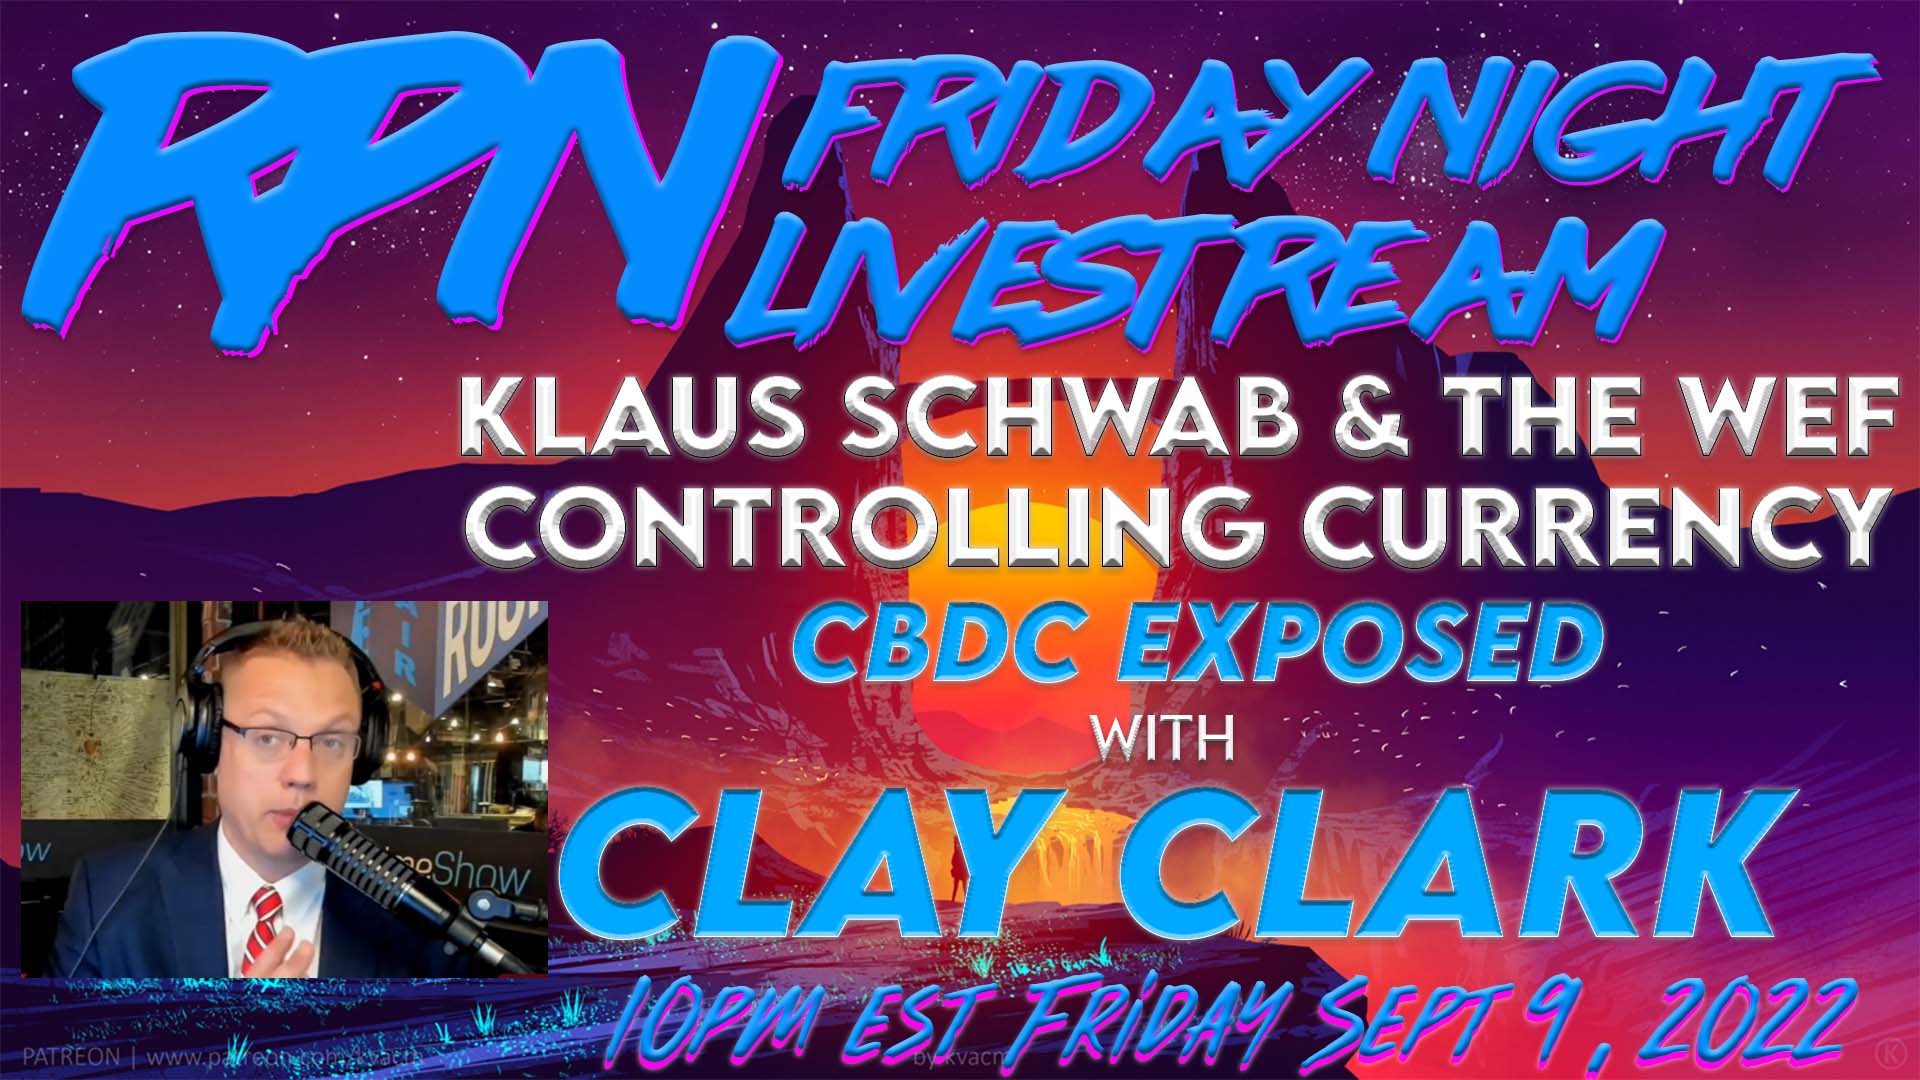 Exposing Central Bank Digital Currency with Clay Clark on Fri. Night Livestream